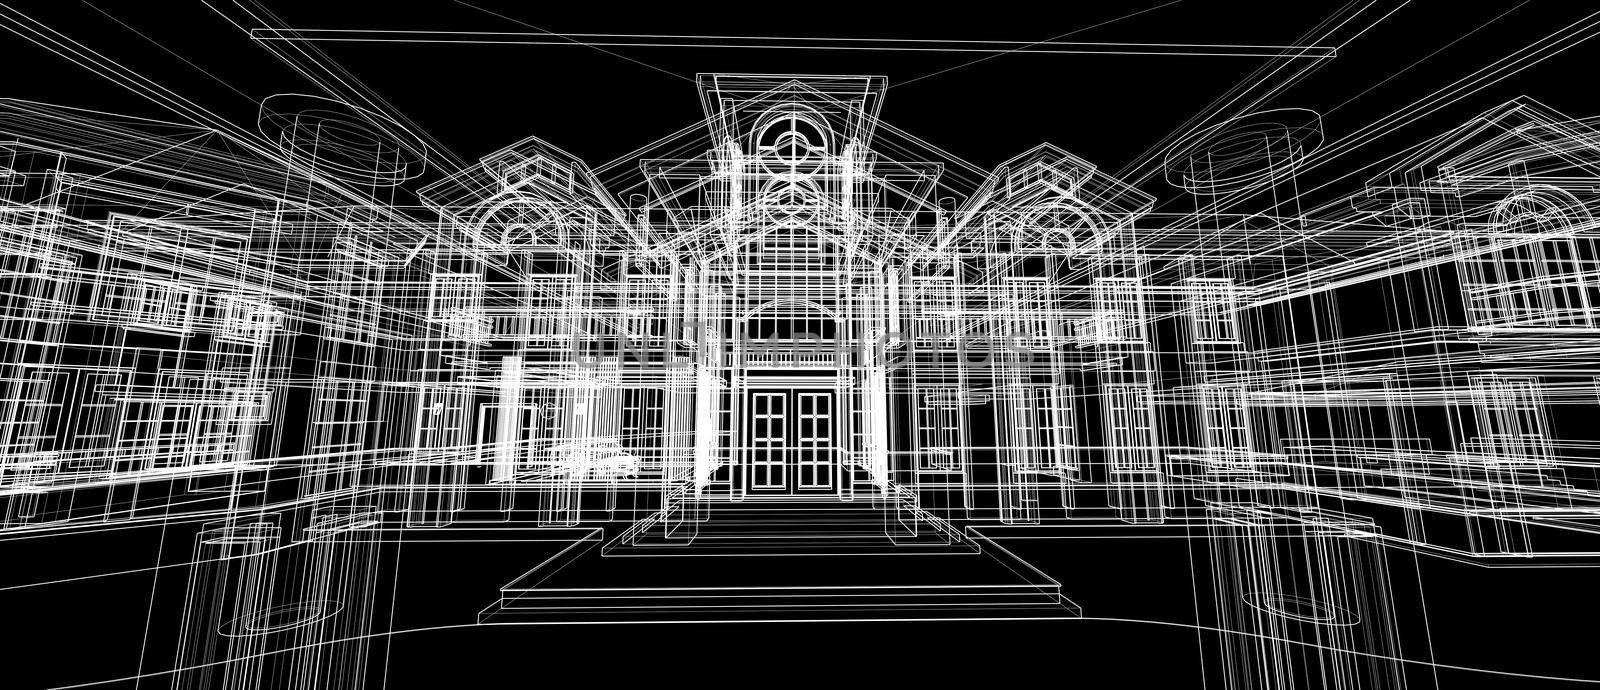 Architecture house space design concept 3d perspective wireframe rendering over black background. For abstract background or wallpaper desktops computer smart technology design architectural theme